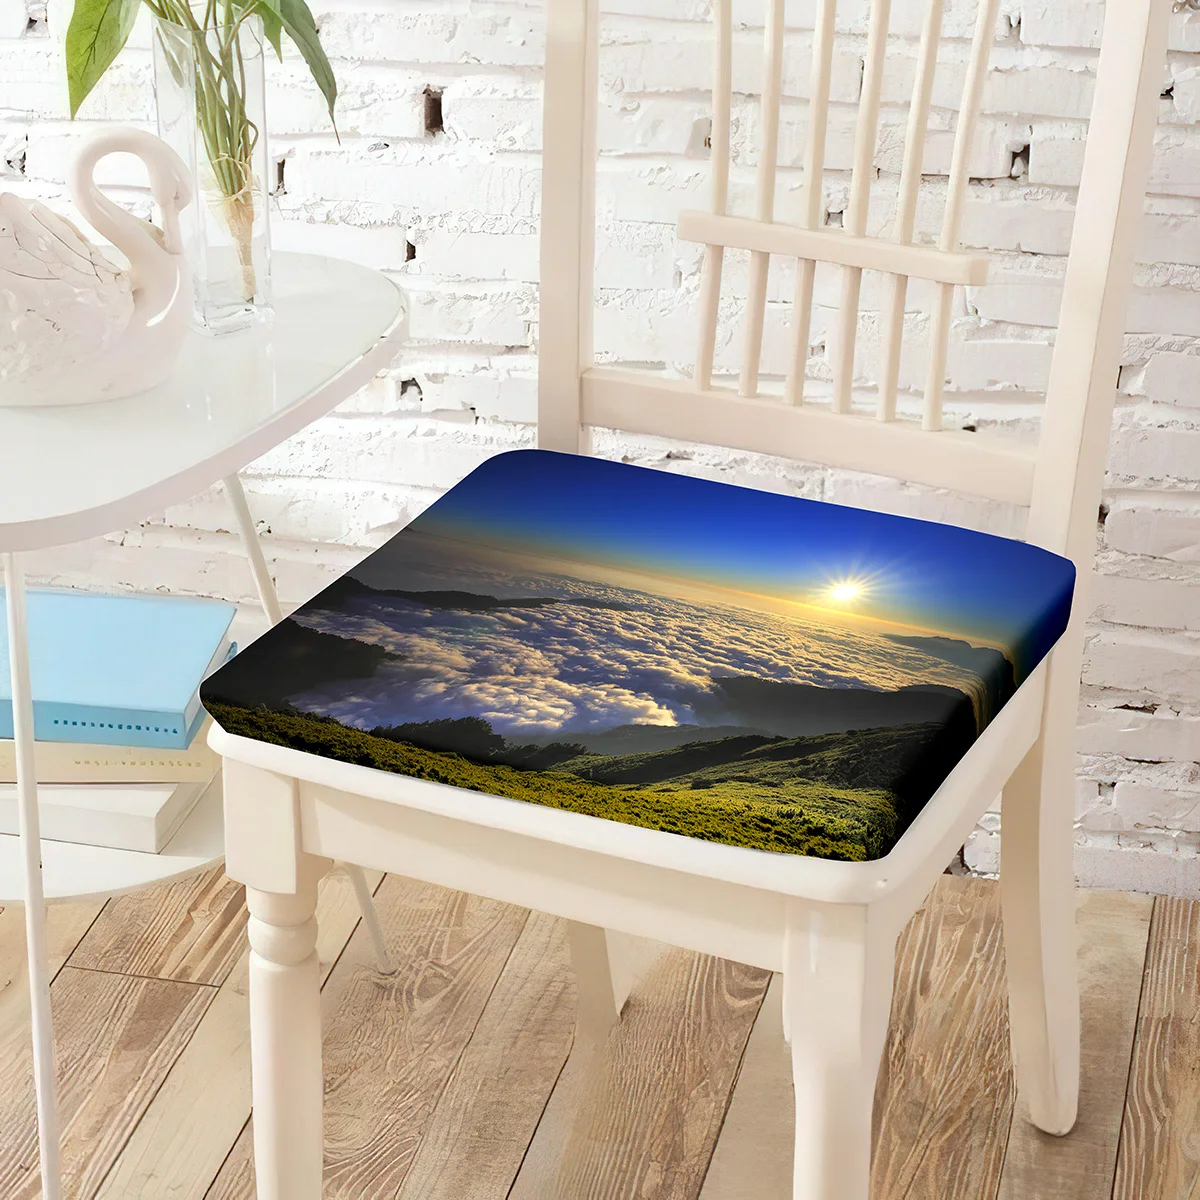 

Sunrise Cloud Mountain Printed Chair Cushion Sitting Cushions Cotton Soft Chairs Decorative Student Stool Office Home Pad Decor